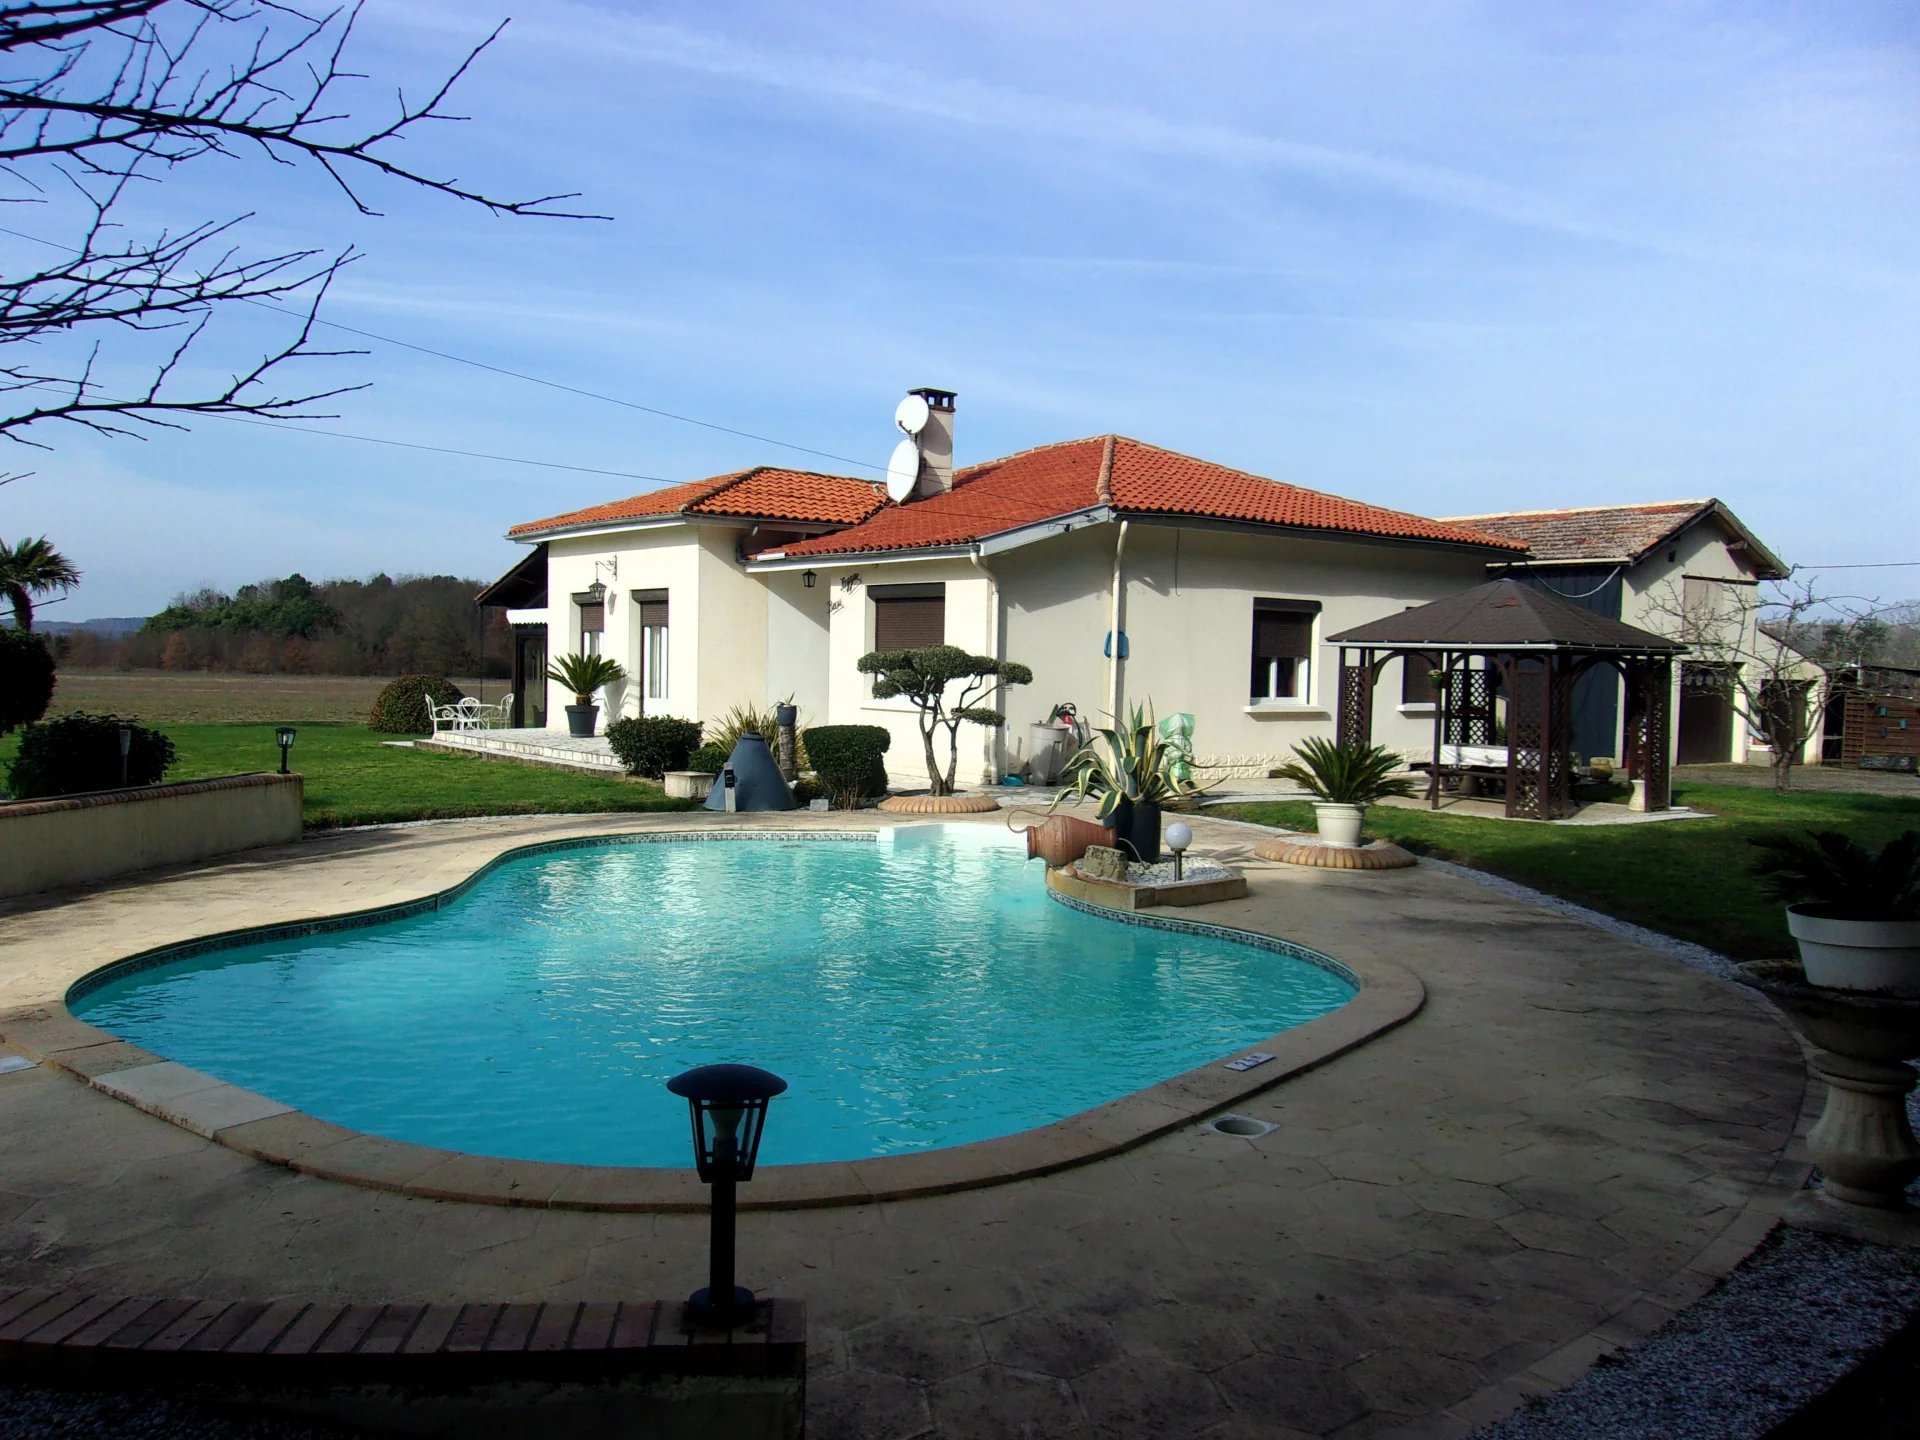 Immaculate 4 Bedroom Villa with Pool and Outbuildings,close to Monségur and Duras